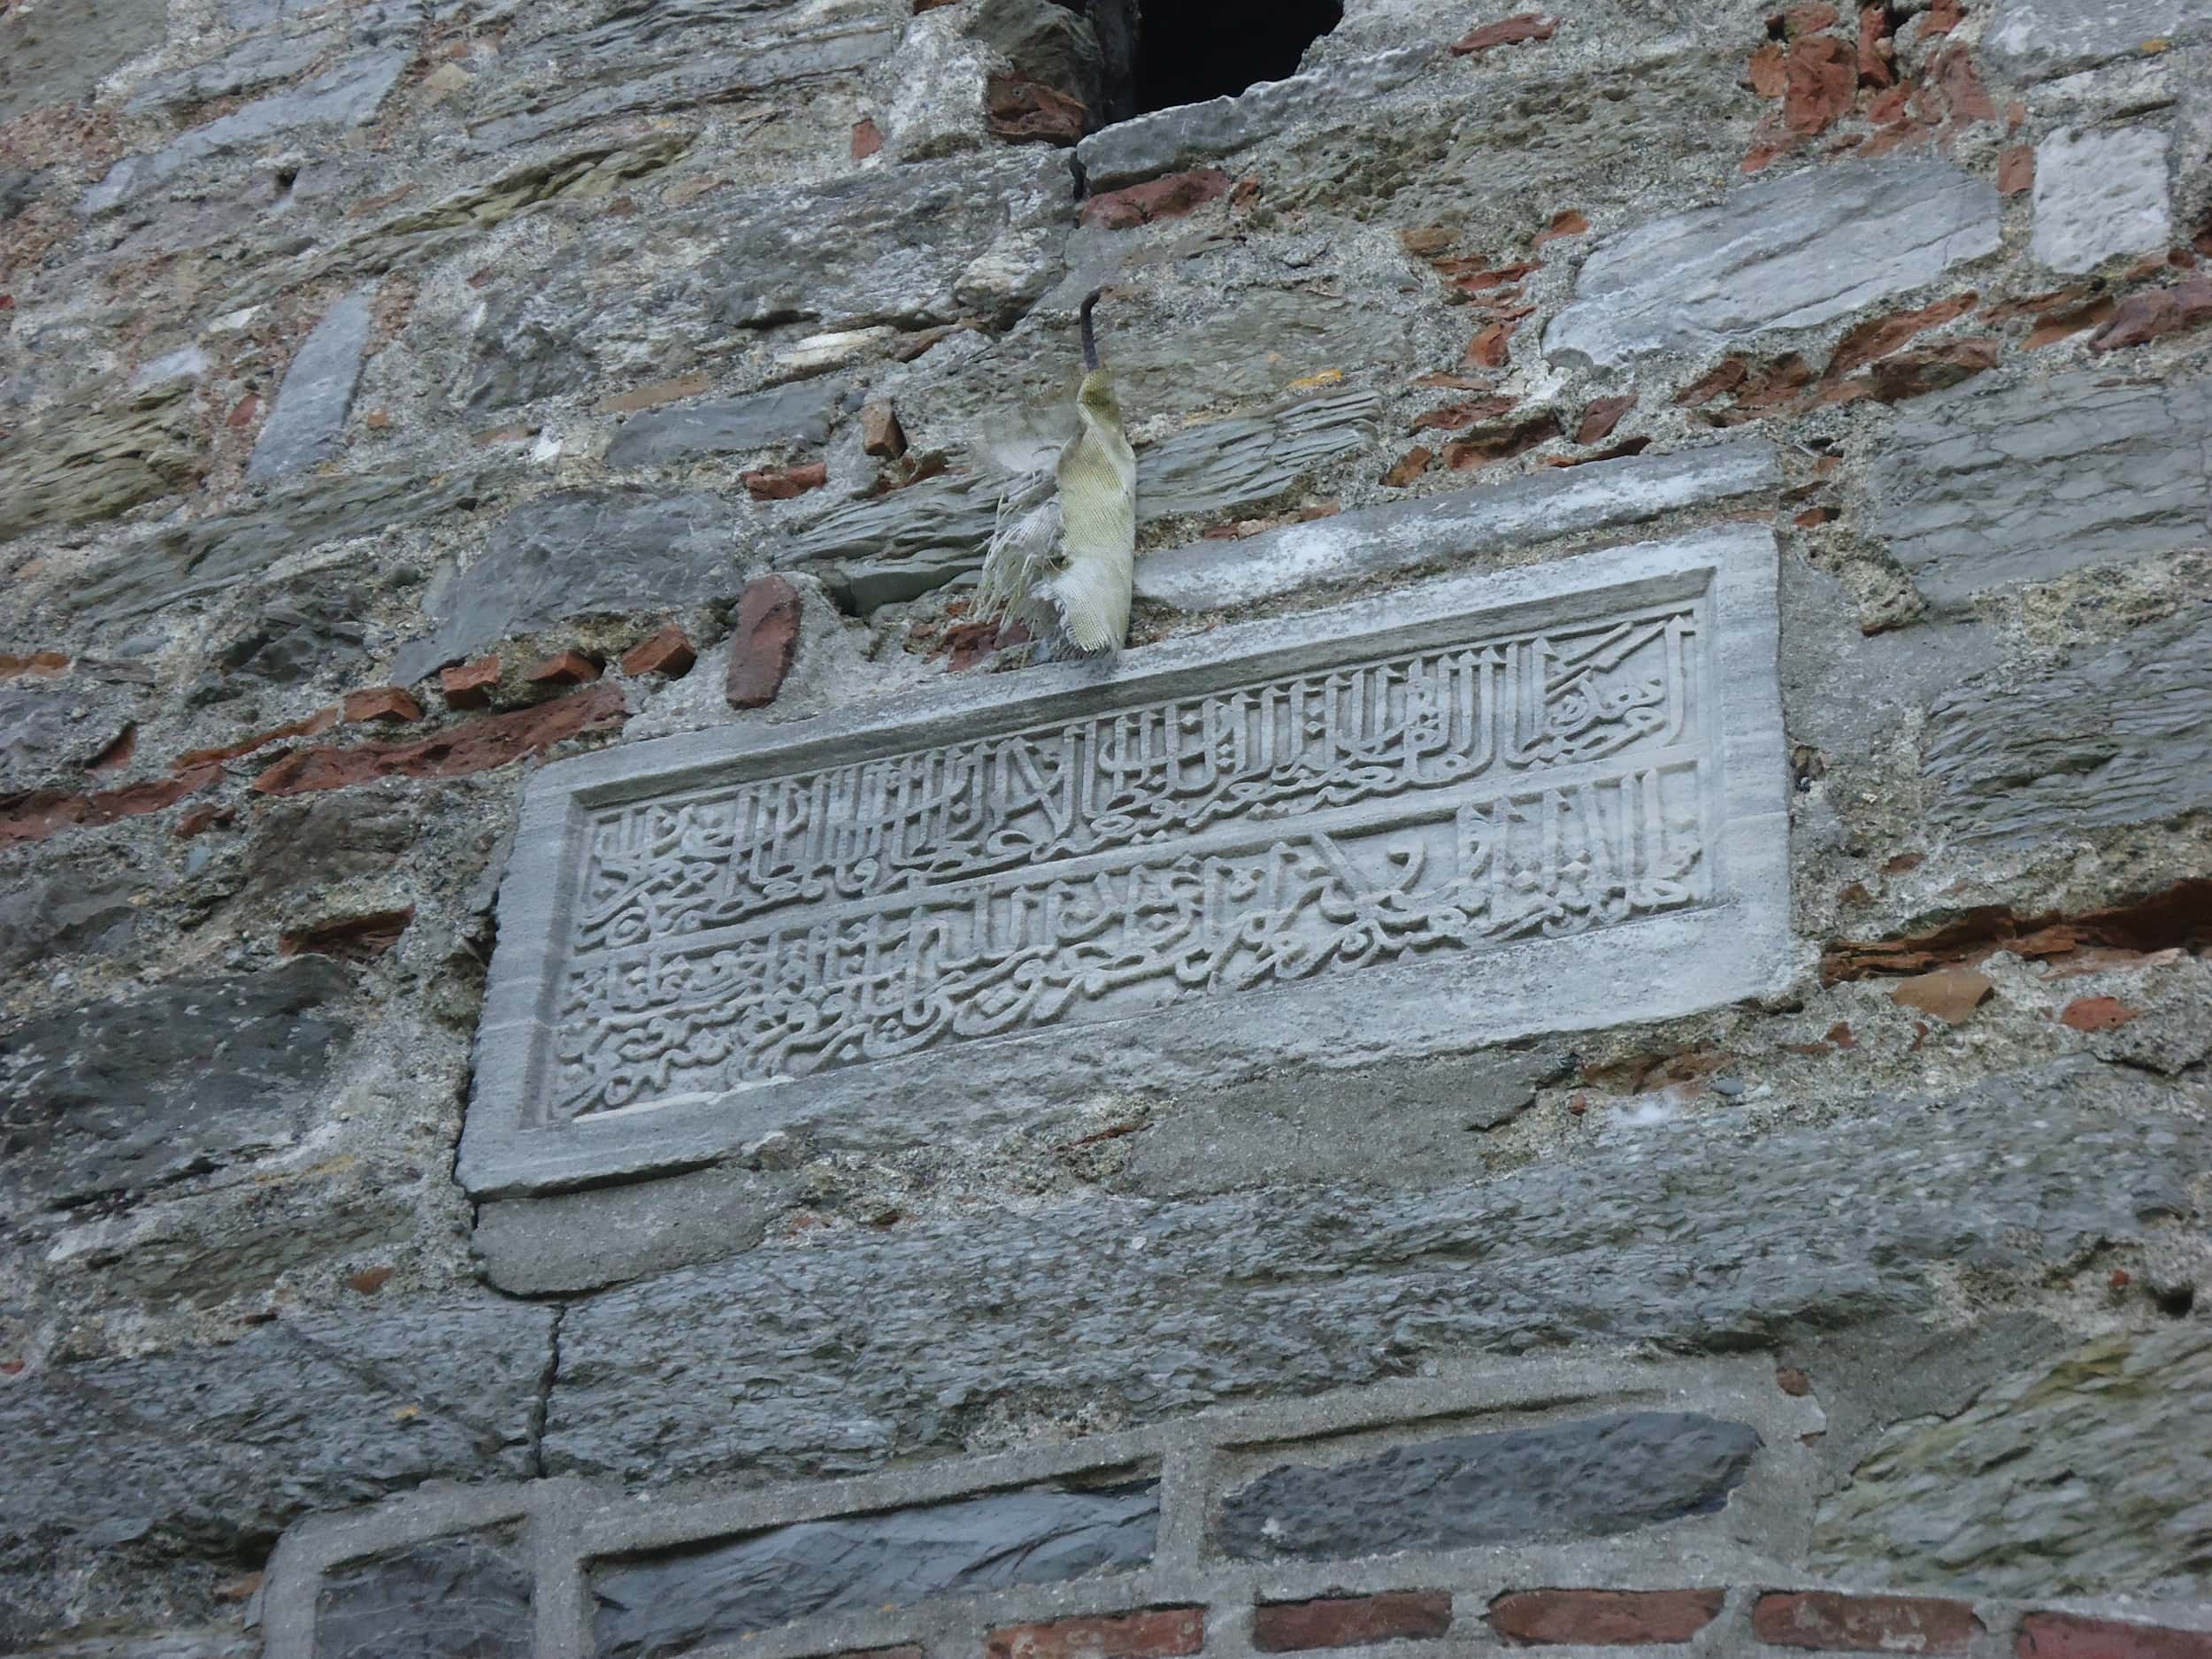 Inscription above the door to the Zağanos Pasha Tower at Rumeli Fortress in Istanbul, Turkey